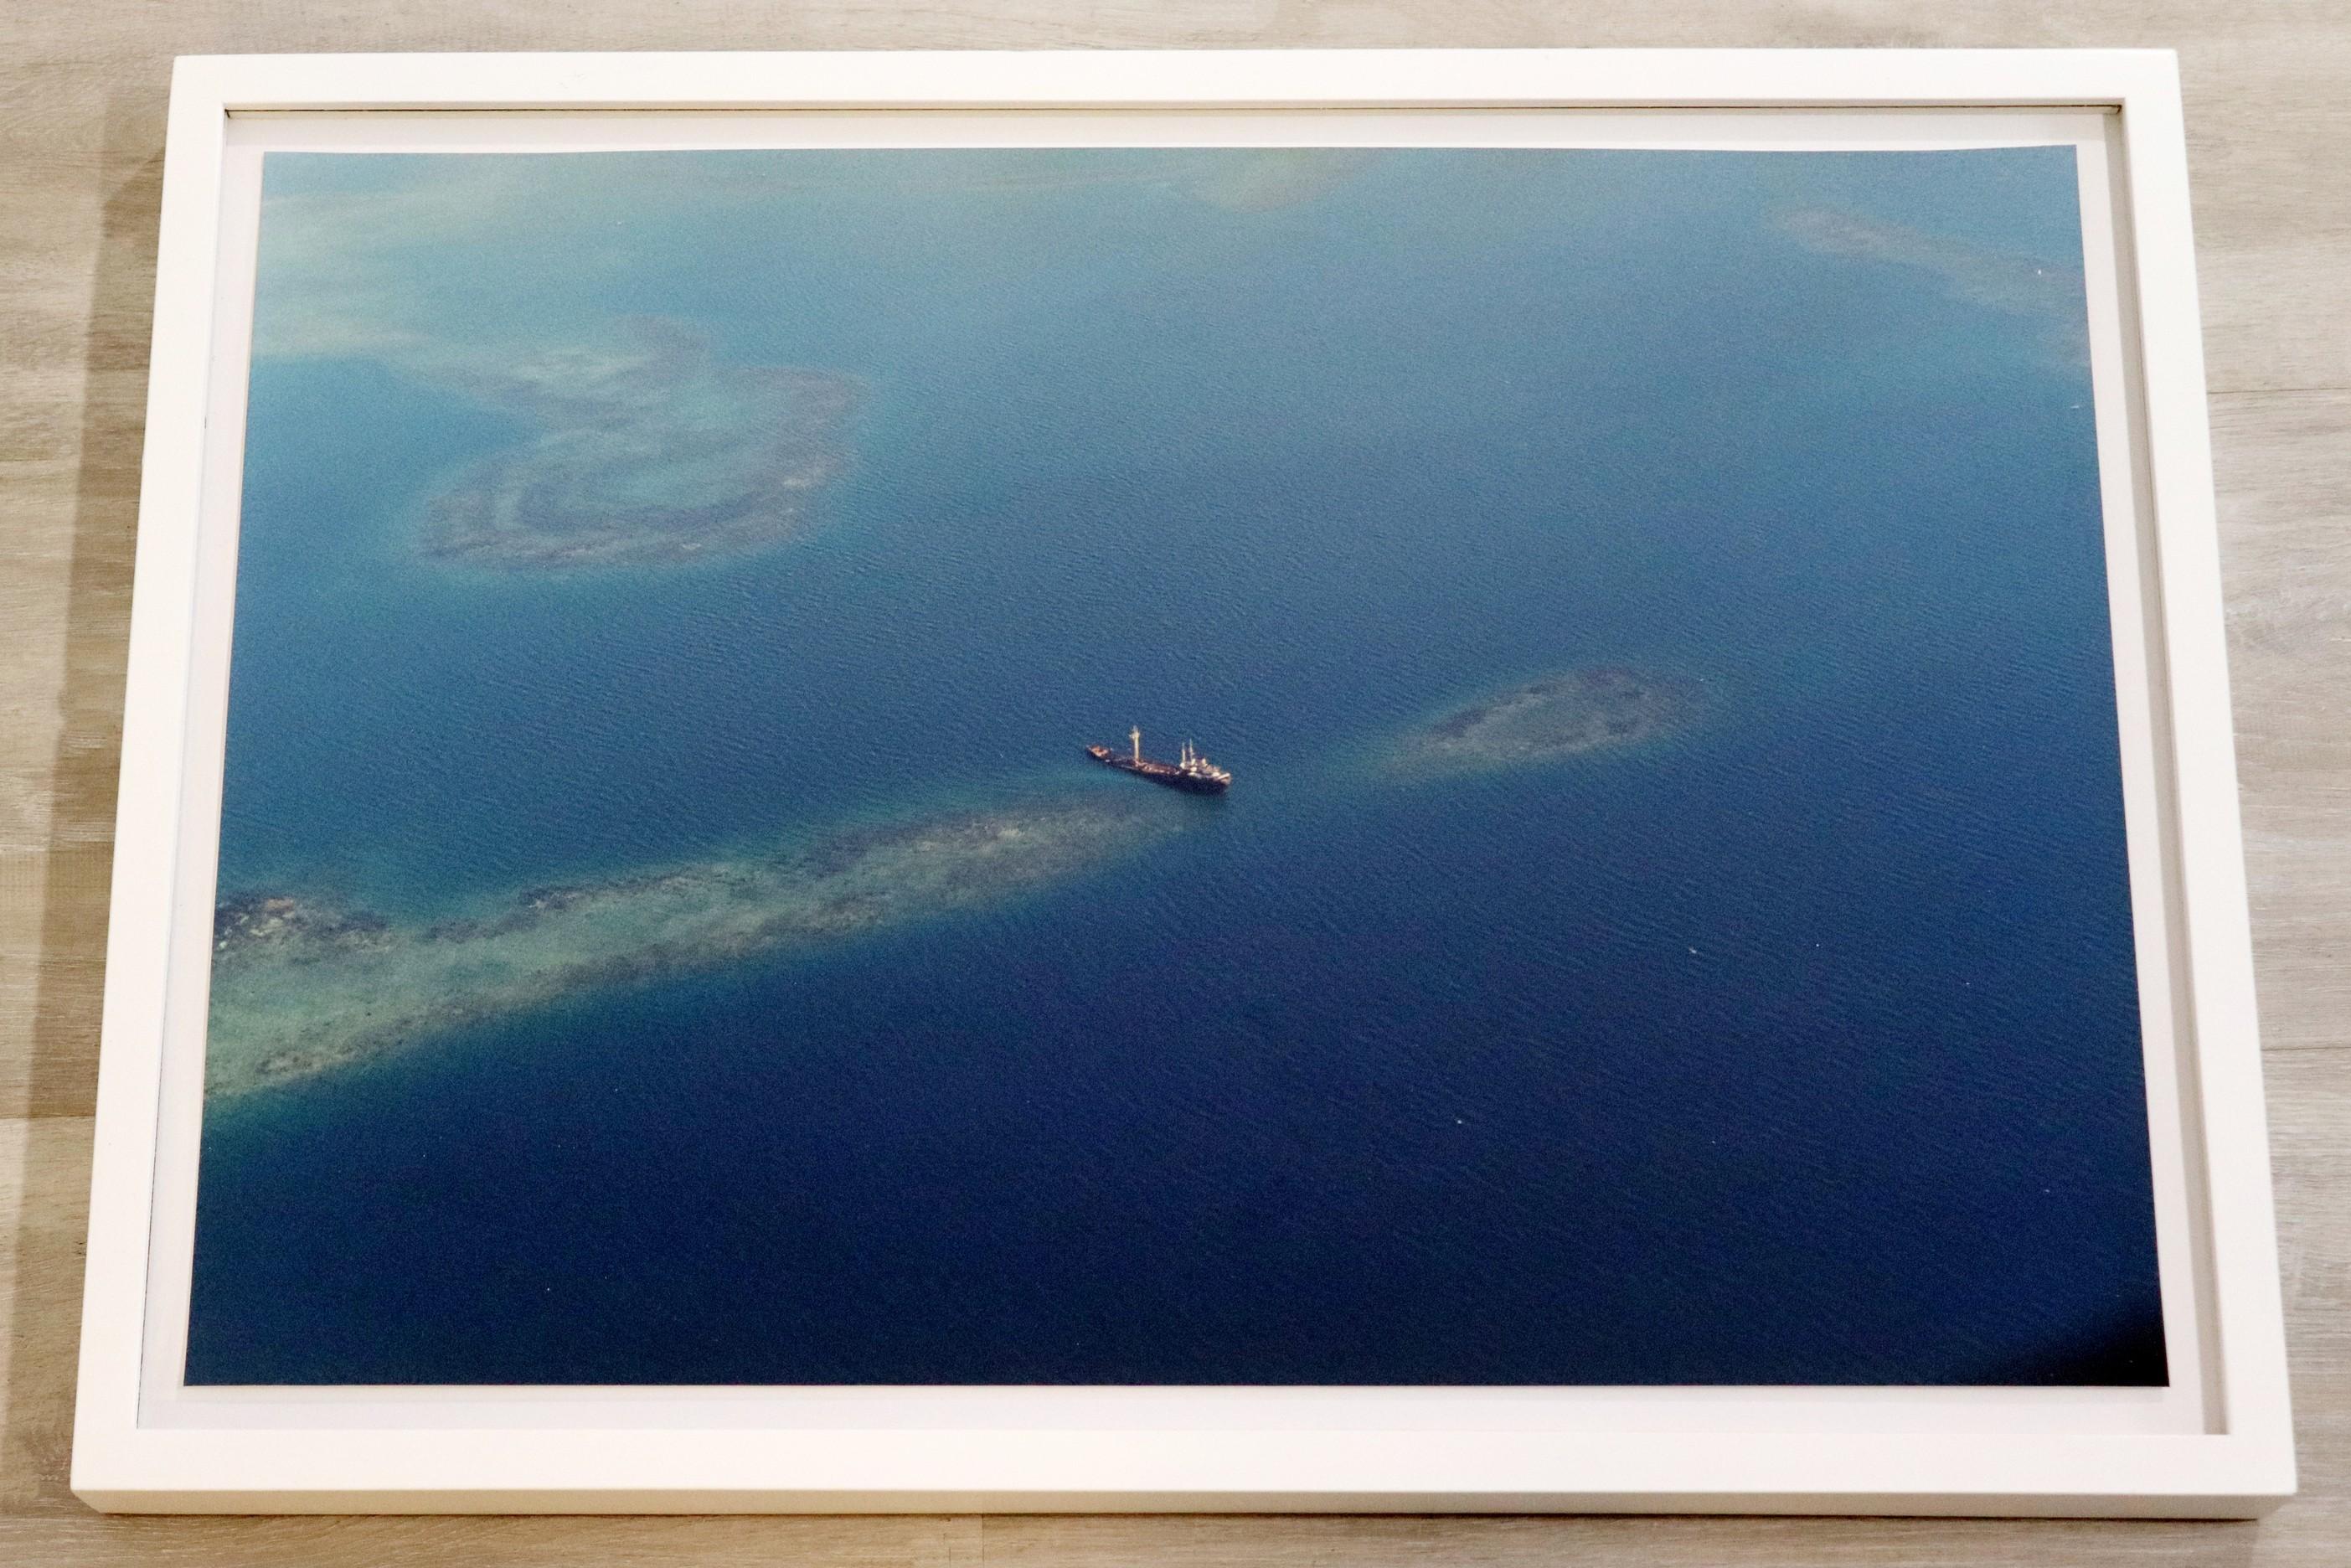 For your consideration is a rich, vibrant, contemporary photograph depicting a Haitian boat at sea by award winning photographer Chantel James. Dimensions: 16 H x 22 W (framed). In excellent condition. 

Chantal James is known for being included